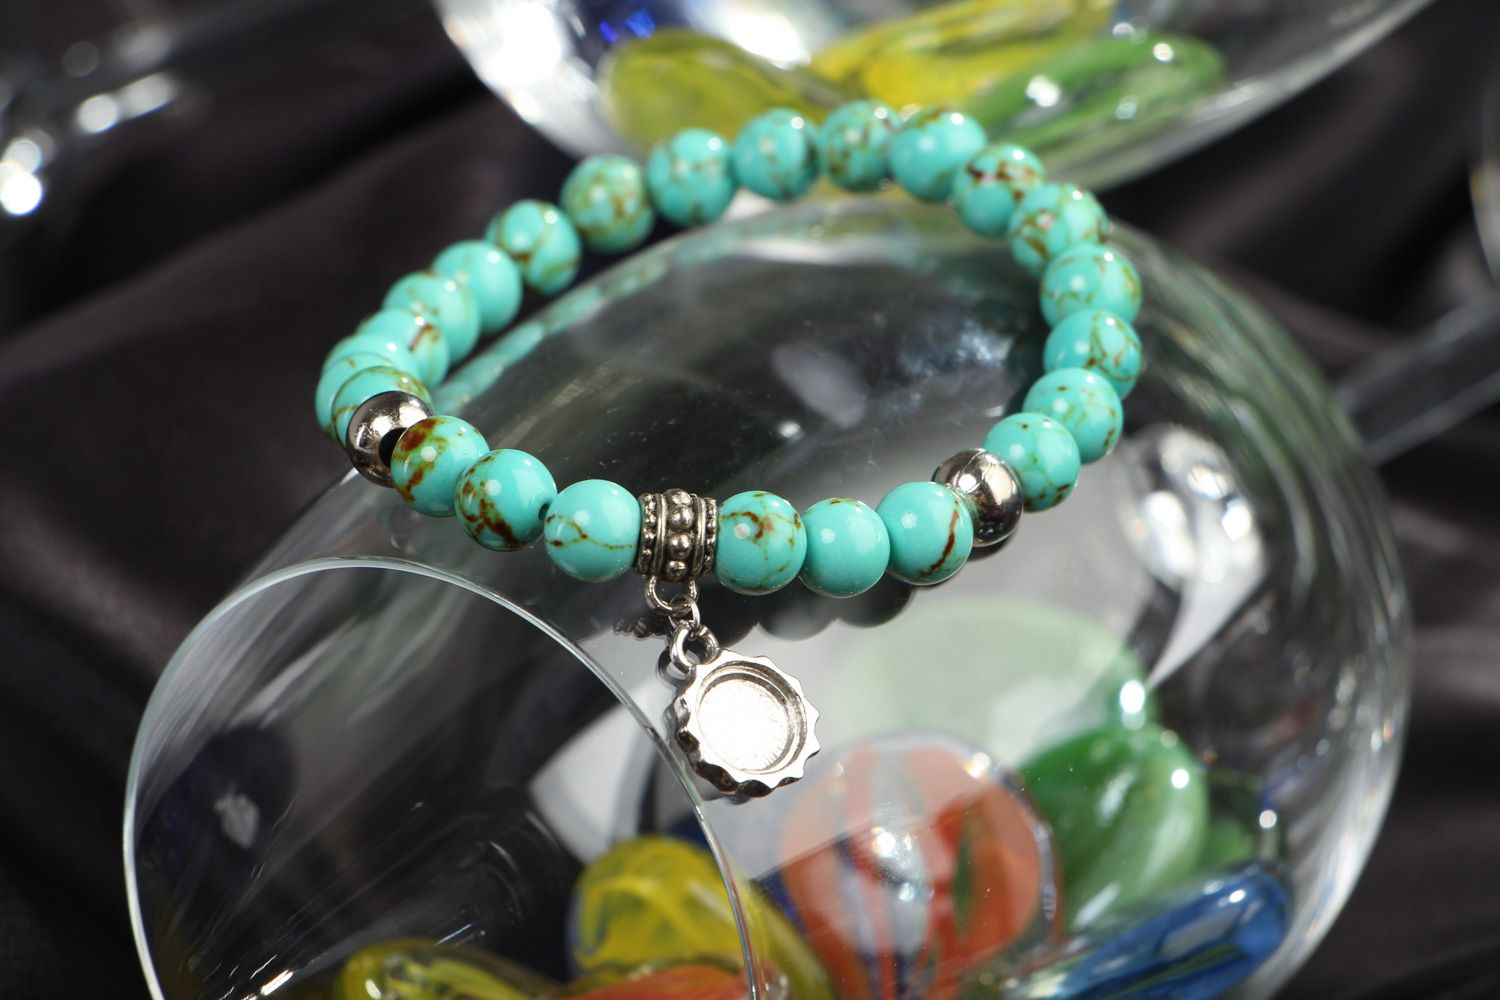 Handmade stretch wrist bracelet with natural turquoise beads and metal charm photo 4